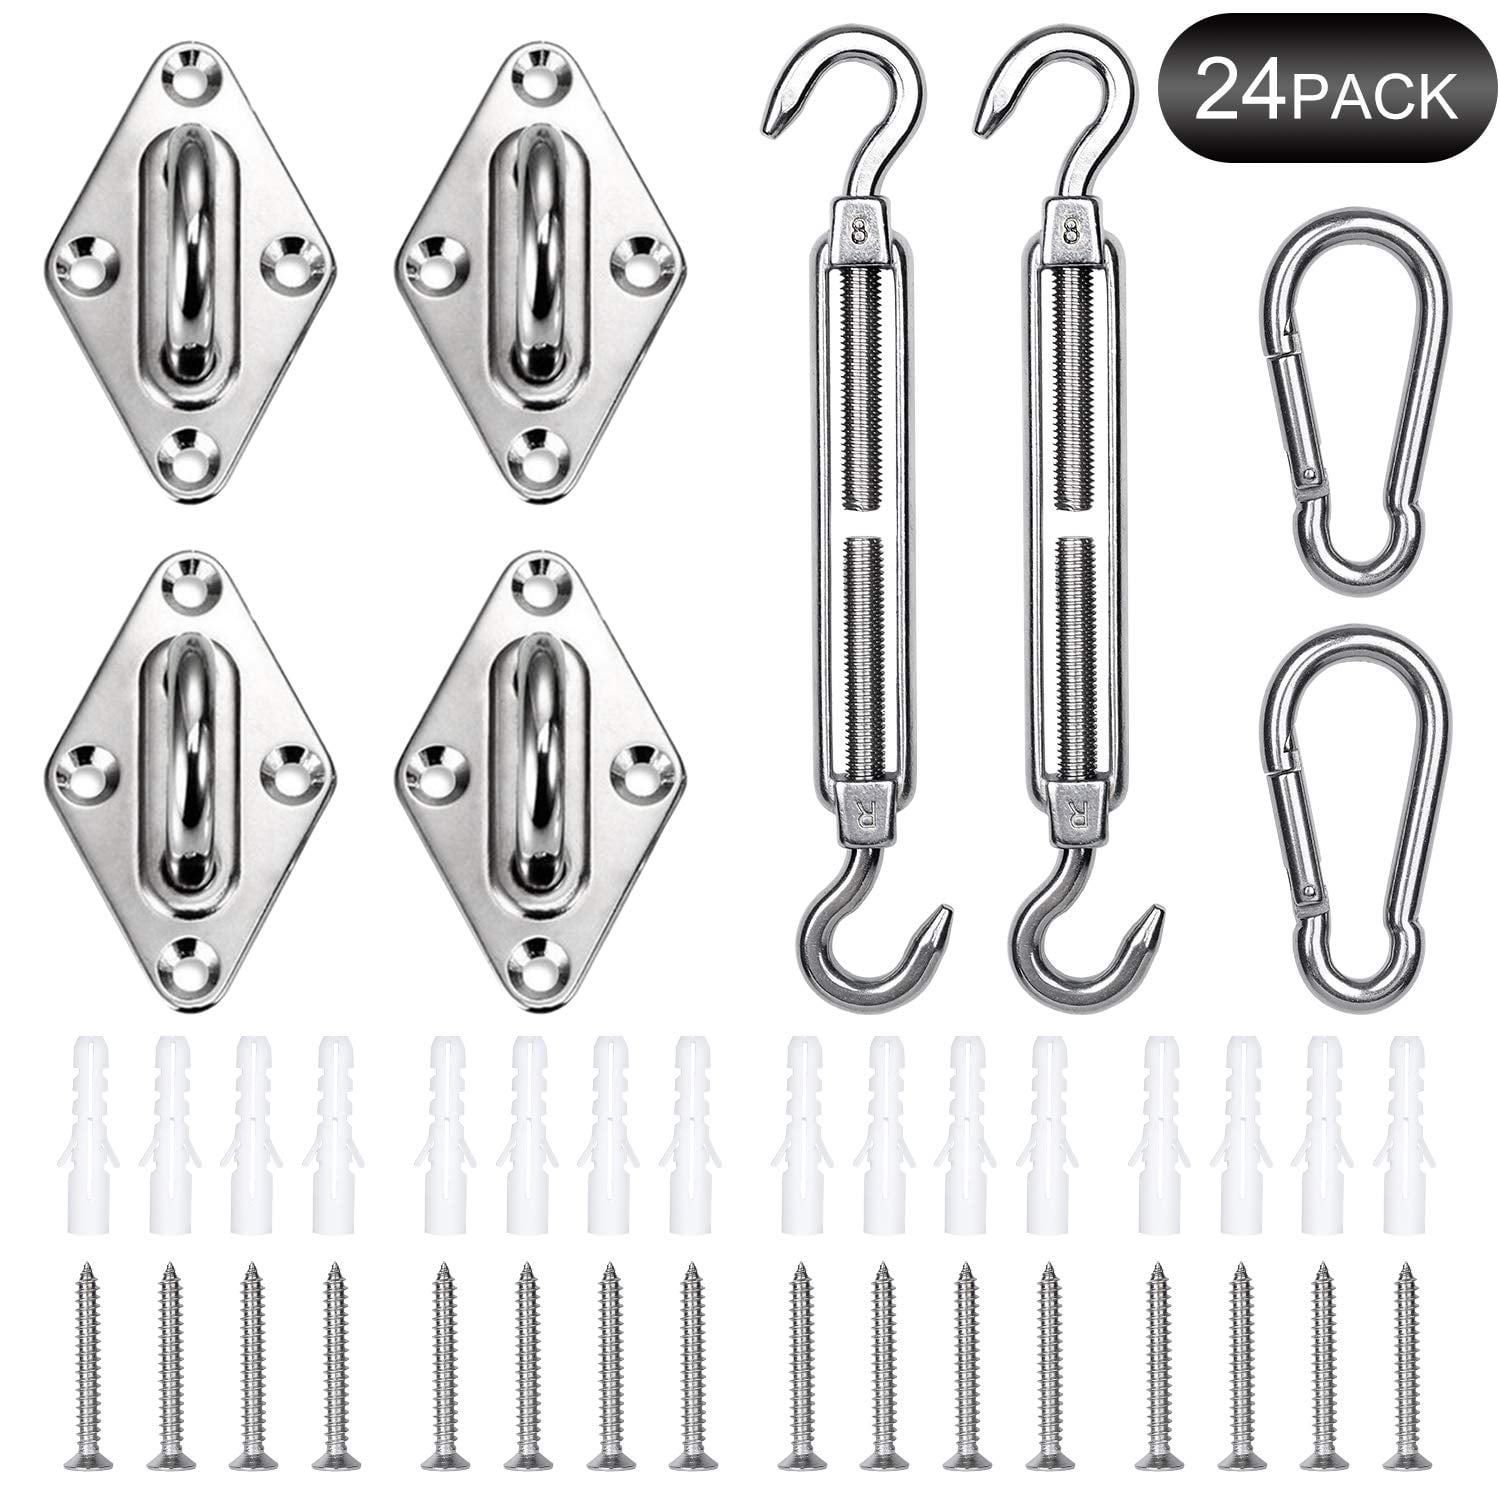 Shade Sail Accessories with Screws Sail Fixing Kit for Rectangle and Square Sun Shade Sails Cosy-TT 6 Inch Heavy Duty Sun Shade Sail Hardware Kit